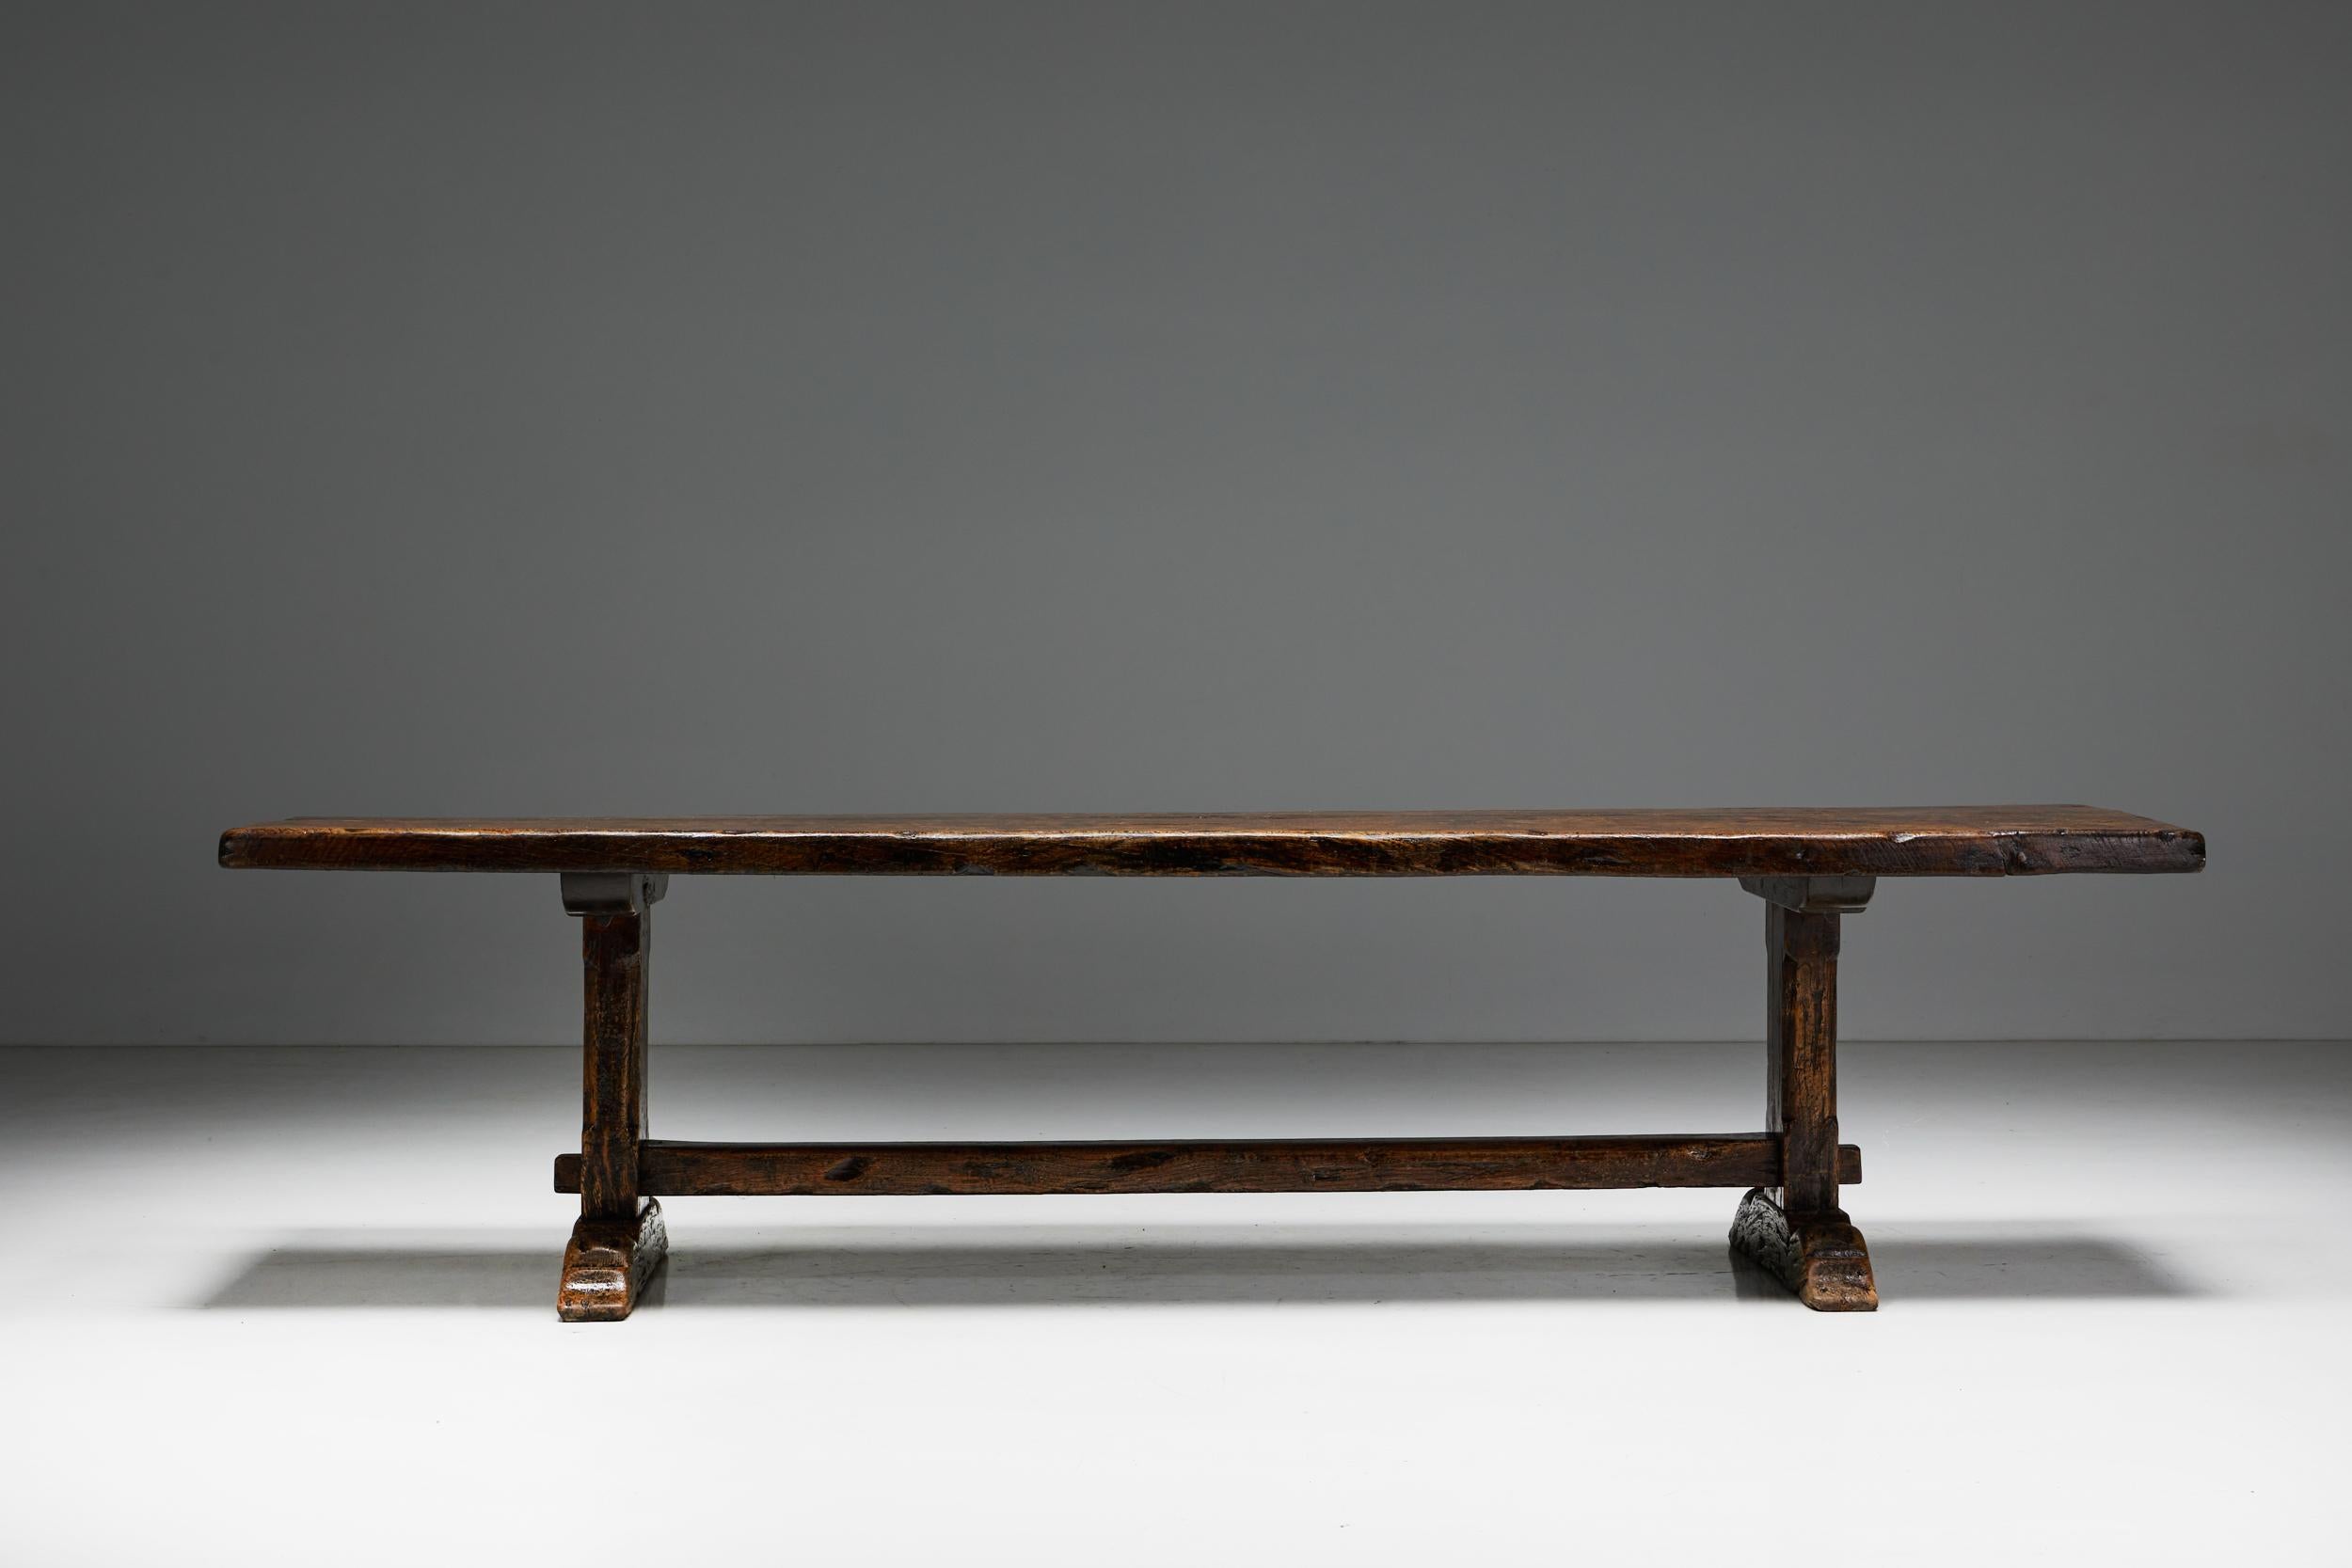 
Monoxylite; Dining Table; Travail Populaire; France; Wabi Sabi; 19th Century; Rustic; Art Populaire; Wooden Table; Console Table; 1900: Early 20th Century; 

Early 20th-century dining table, featuring a unique tabletop pattern of solid oak wood.